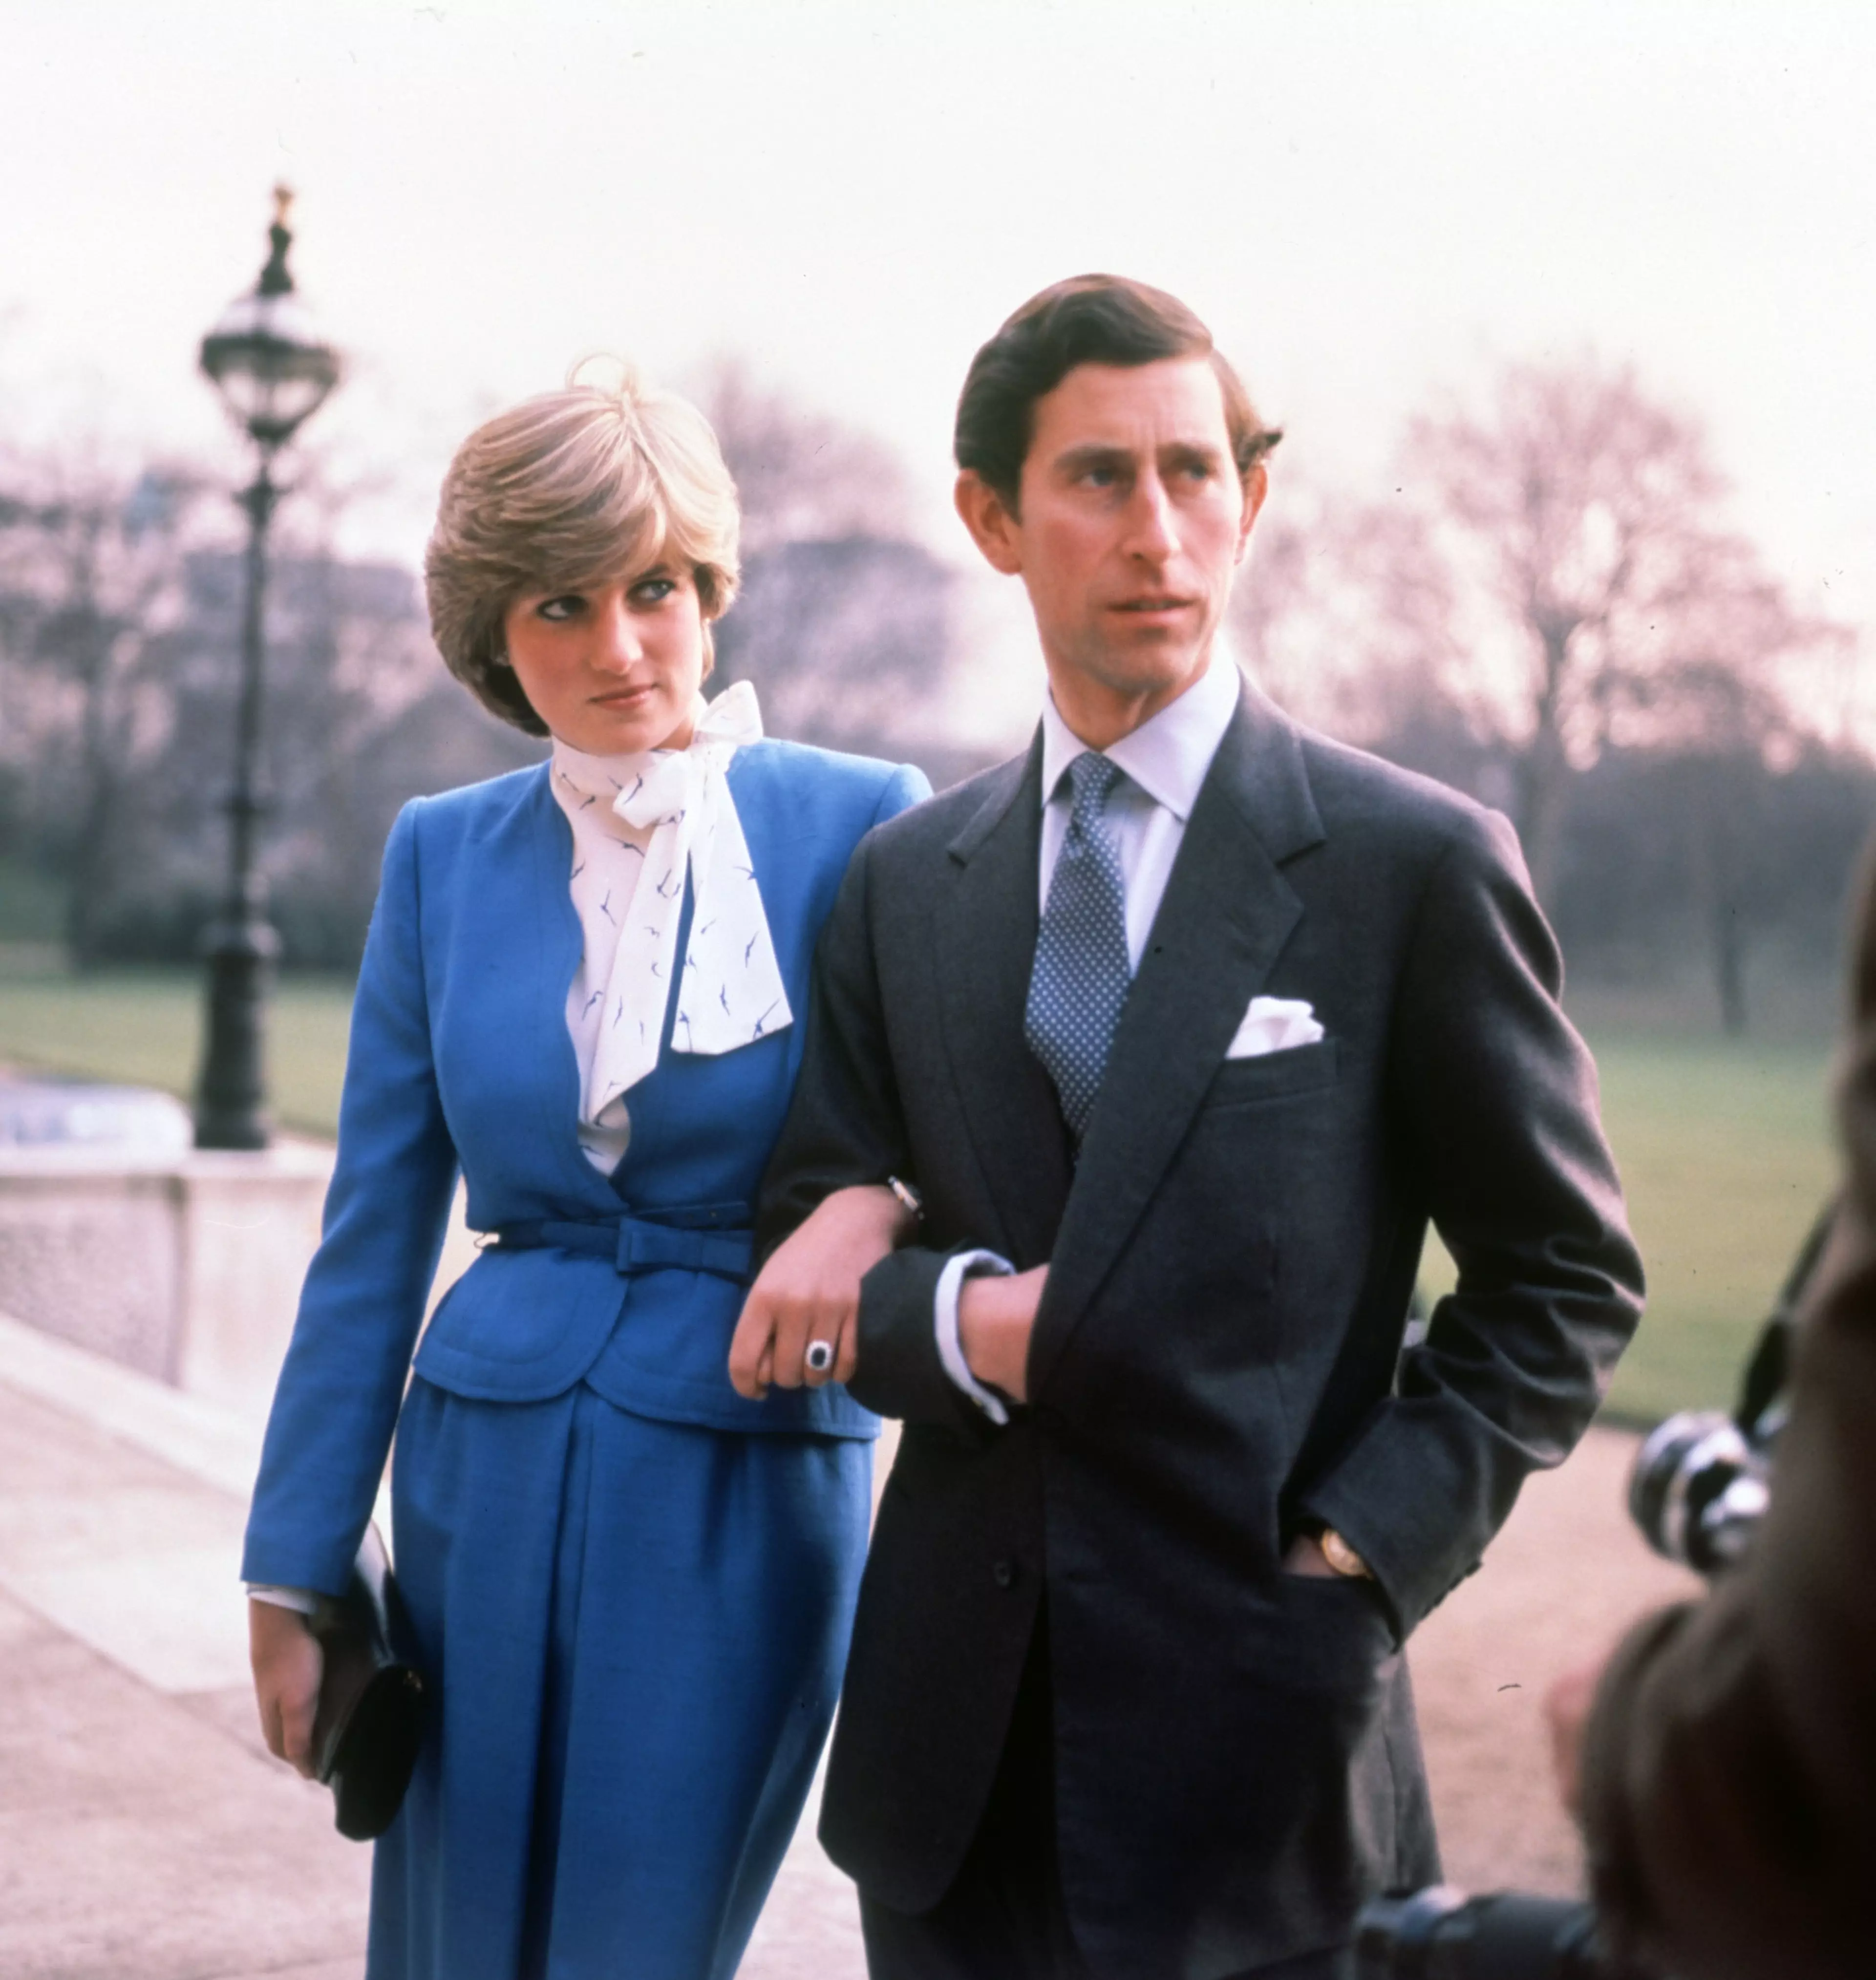 The film will follow Princess Diana as she decides to leave Prince Charles (